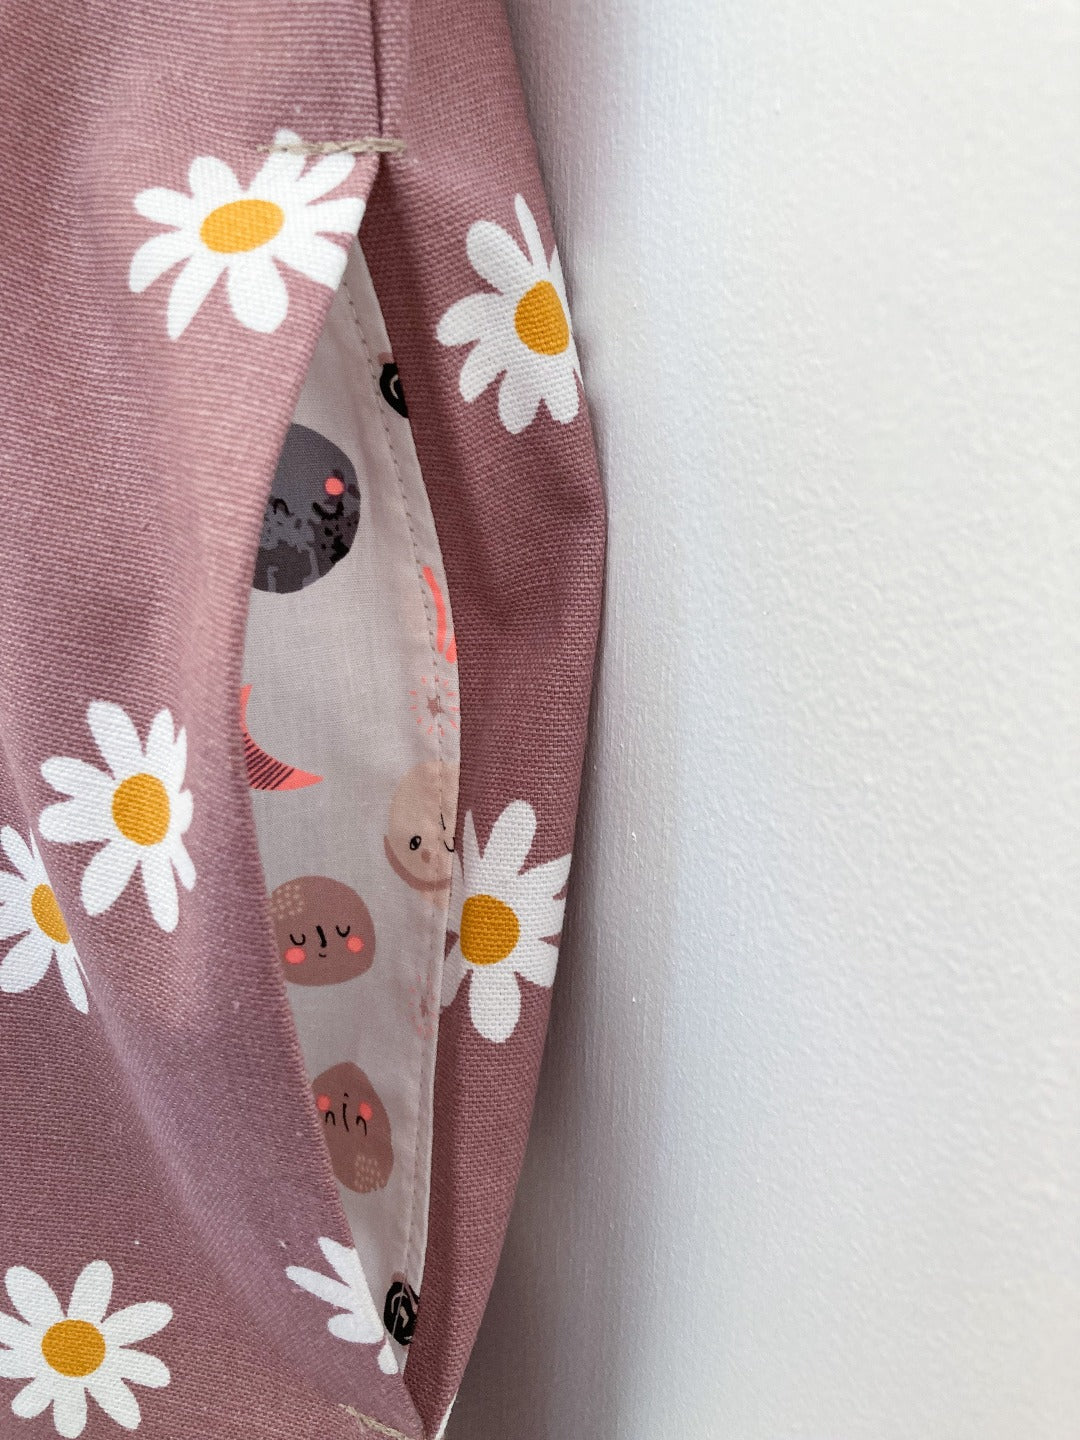 Pink cotton daisy print dungarees